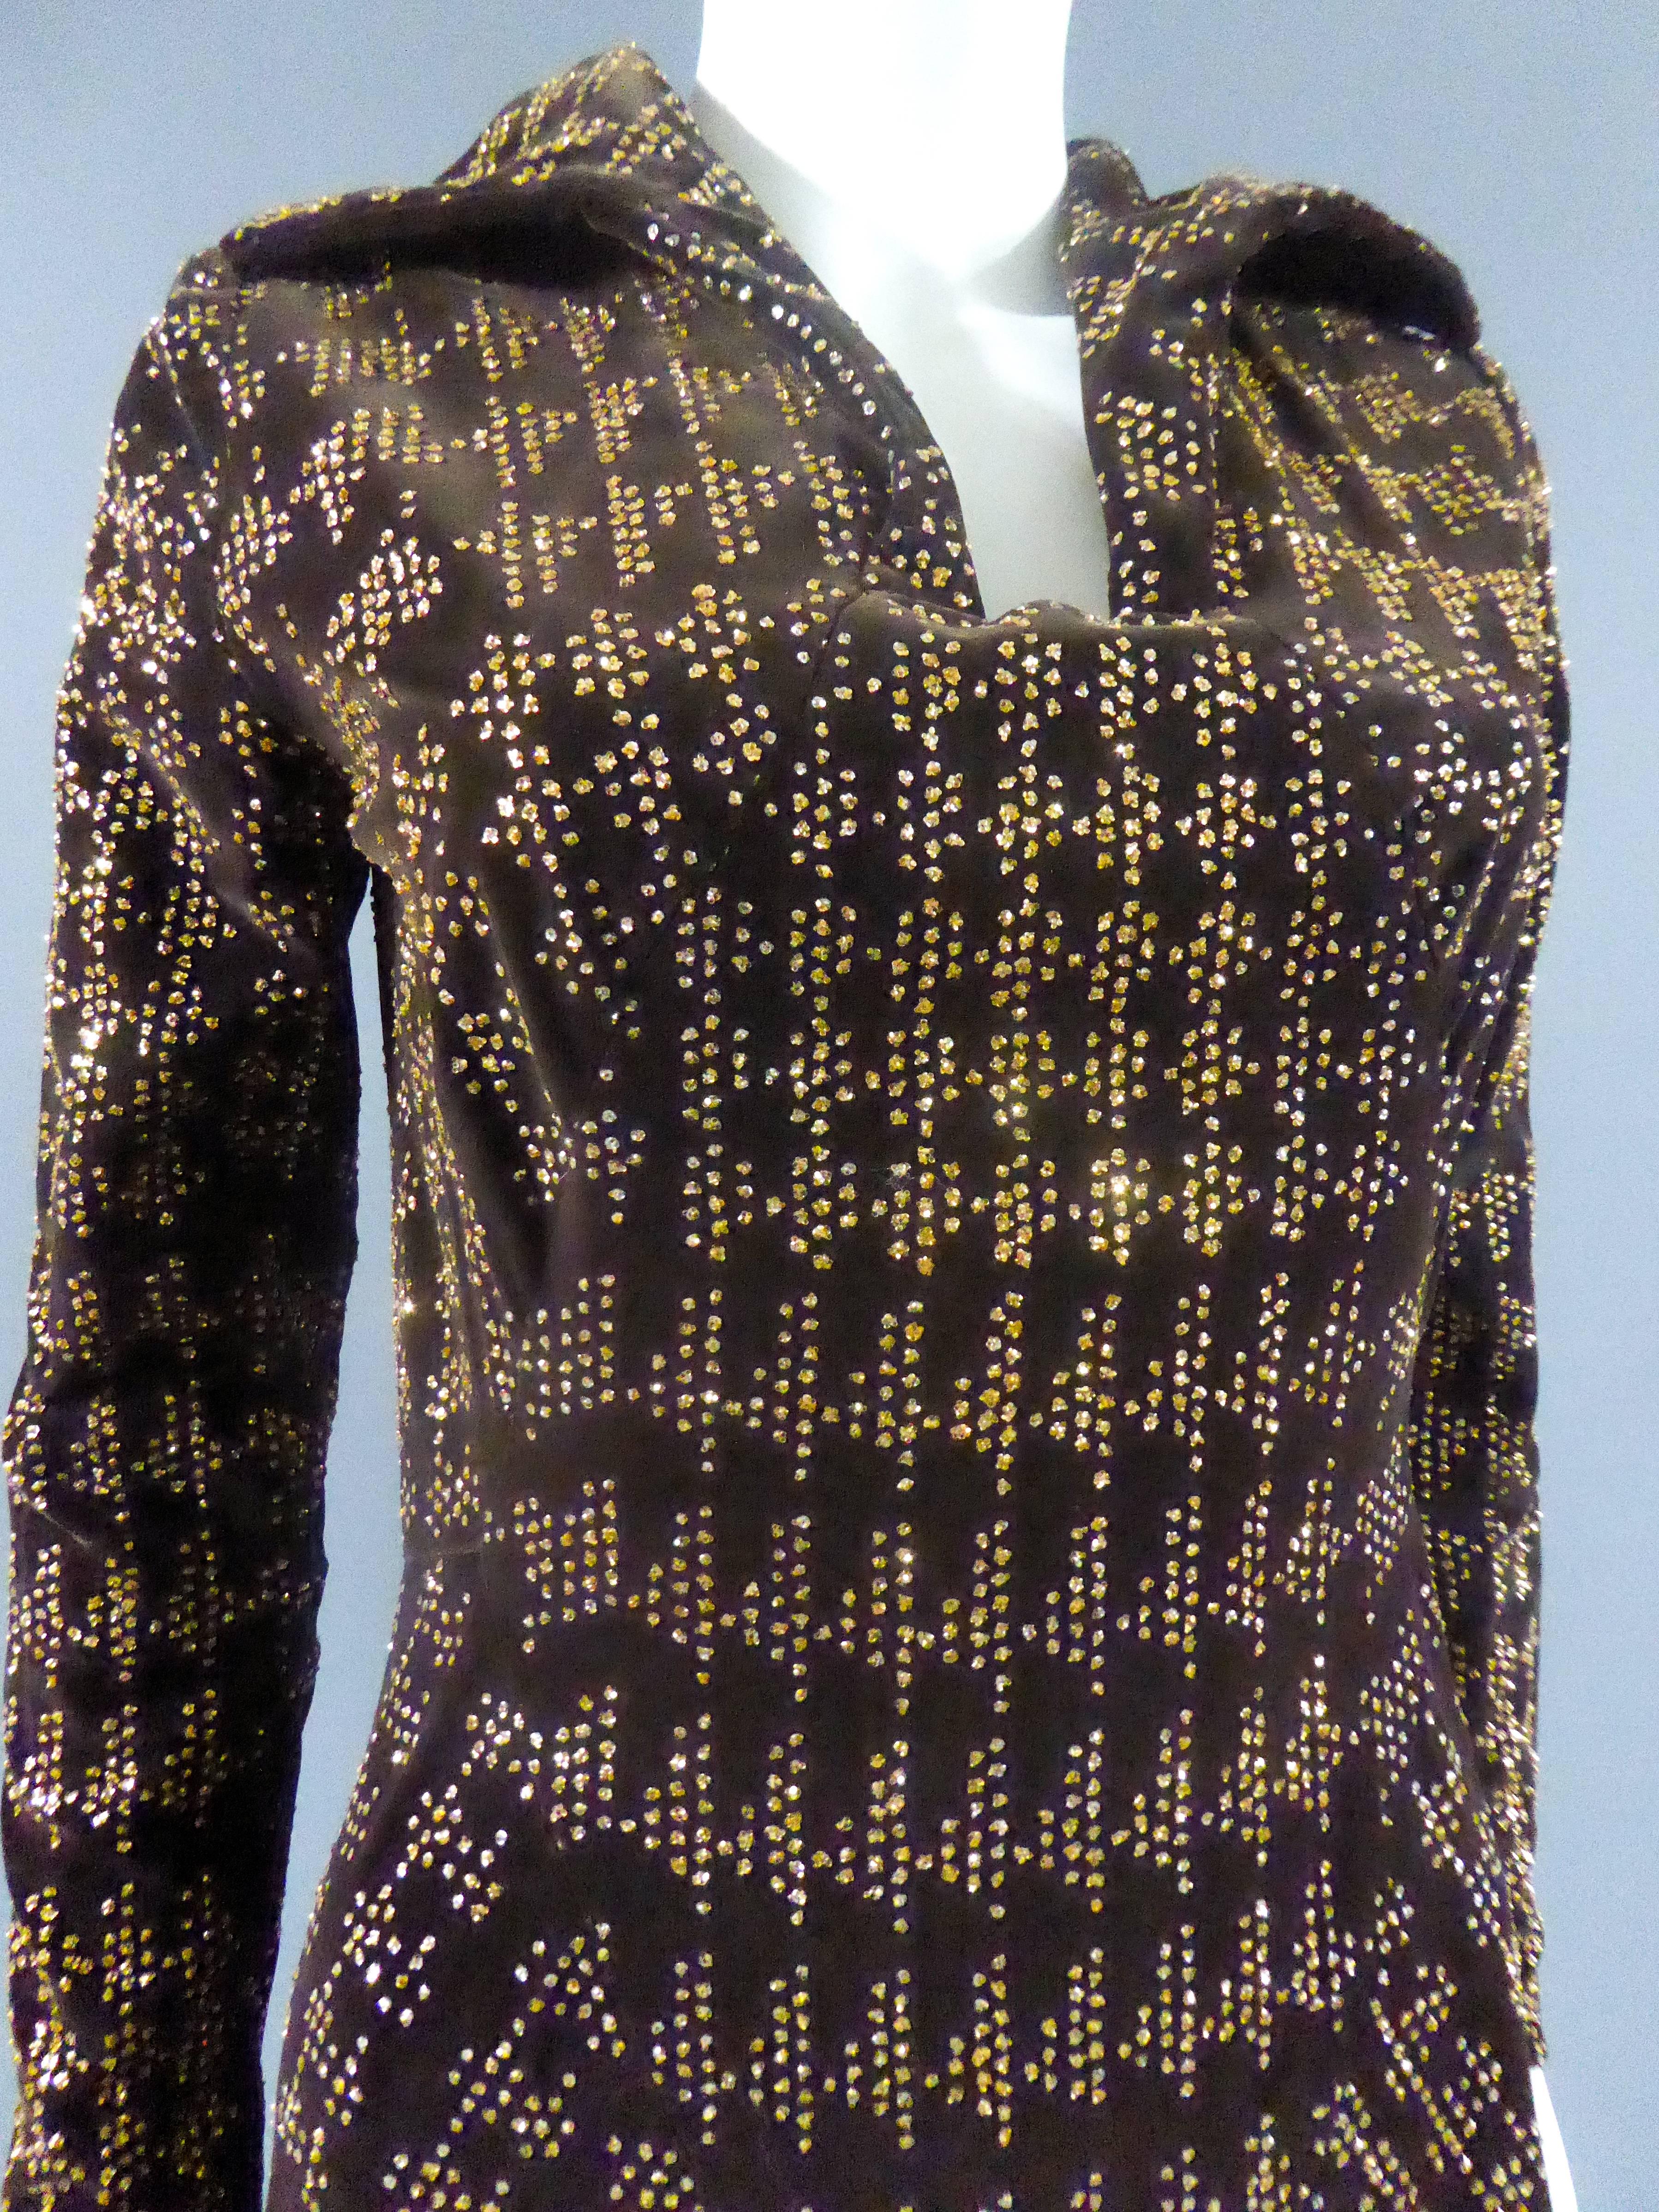 Circa 1975

France

Long dress with loose skirt and brown velvet with golden glitter glued in geometric patterns and houndstooth. Open shirt collar on narrow and rectangular chest. Zipper in the back and collar closed by clasps at the back. Long